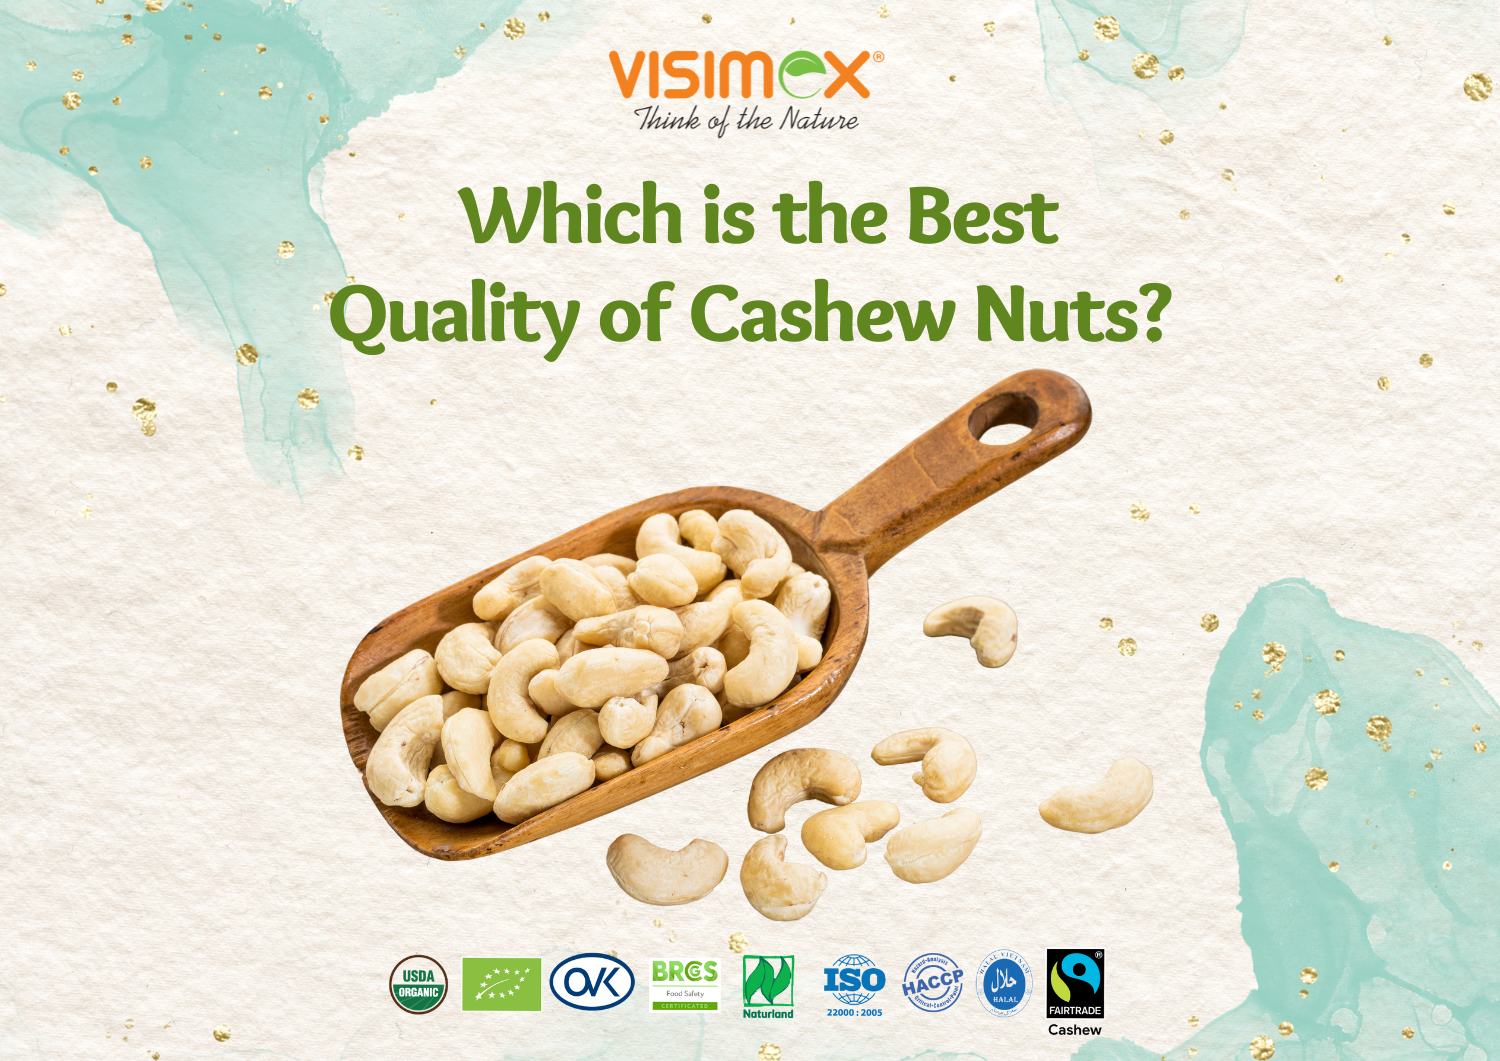 Which is the Best Quality of Cashew Nuts?